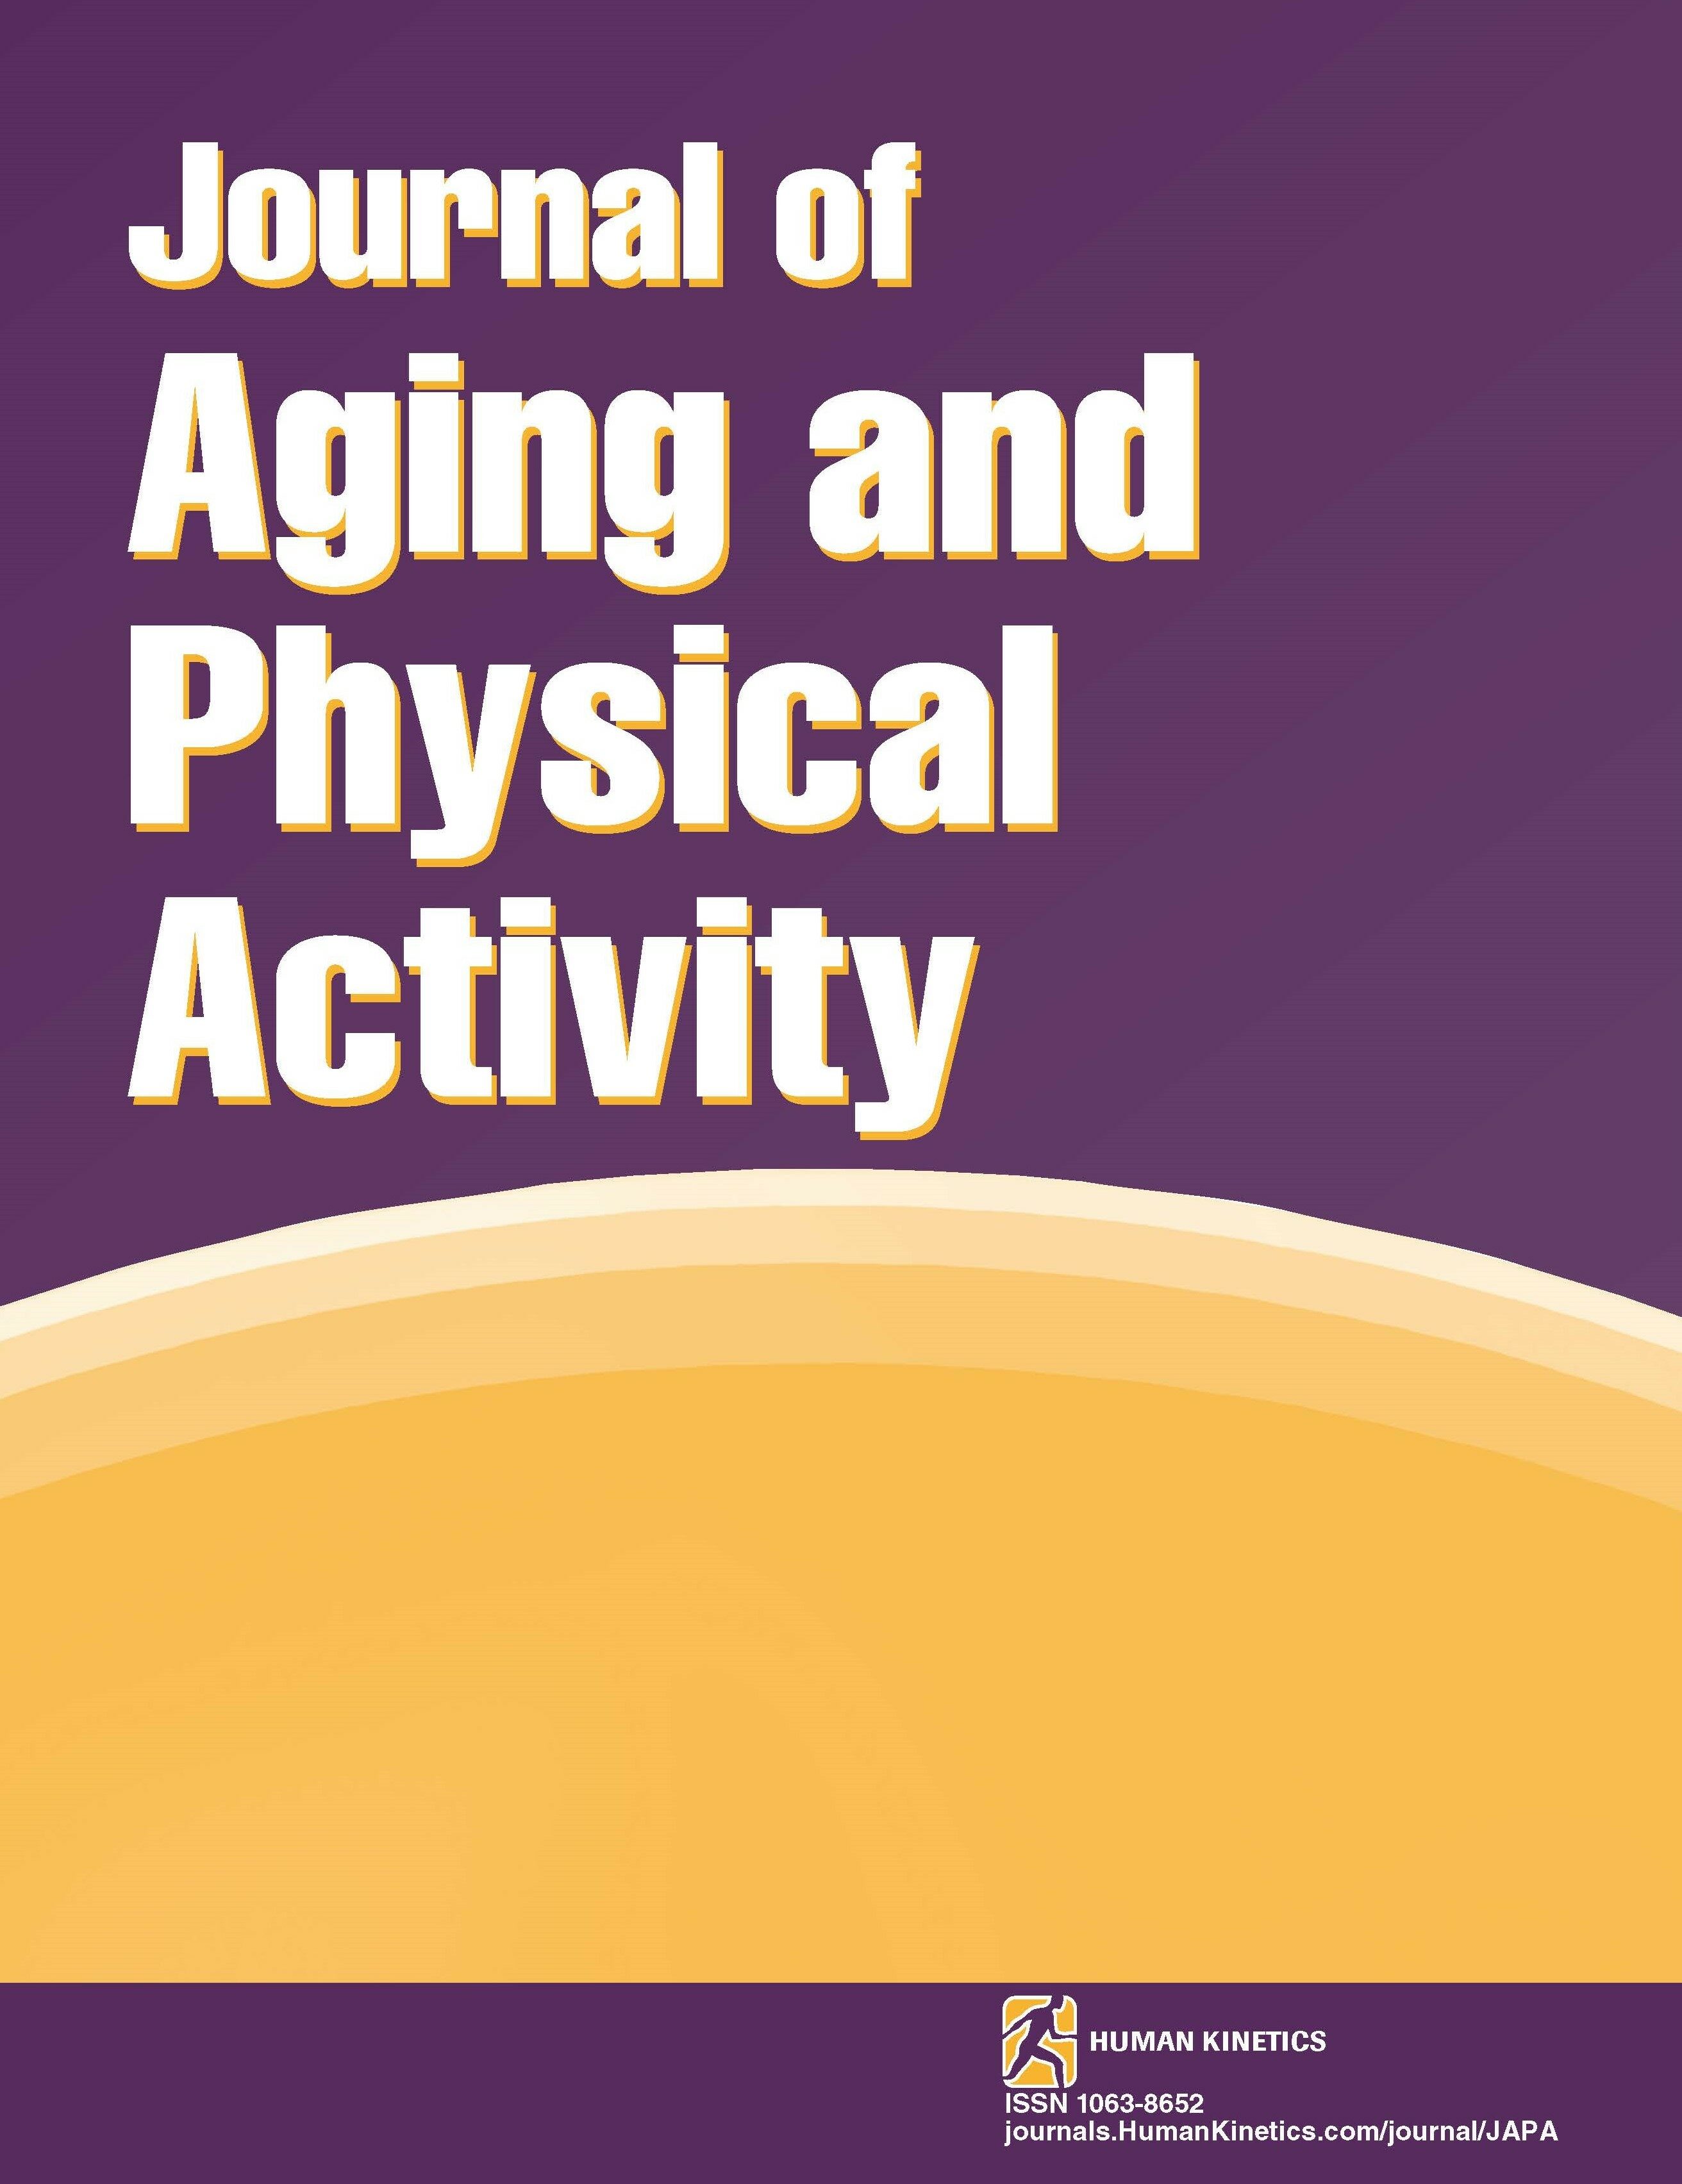 Translation and Linguistic Validation of the Assessment of Physical Activity in Frail Older People into Simplified Chinese Using Cognitive Interviewing Methodology